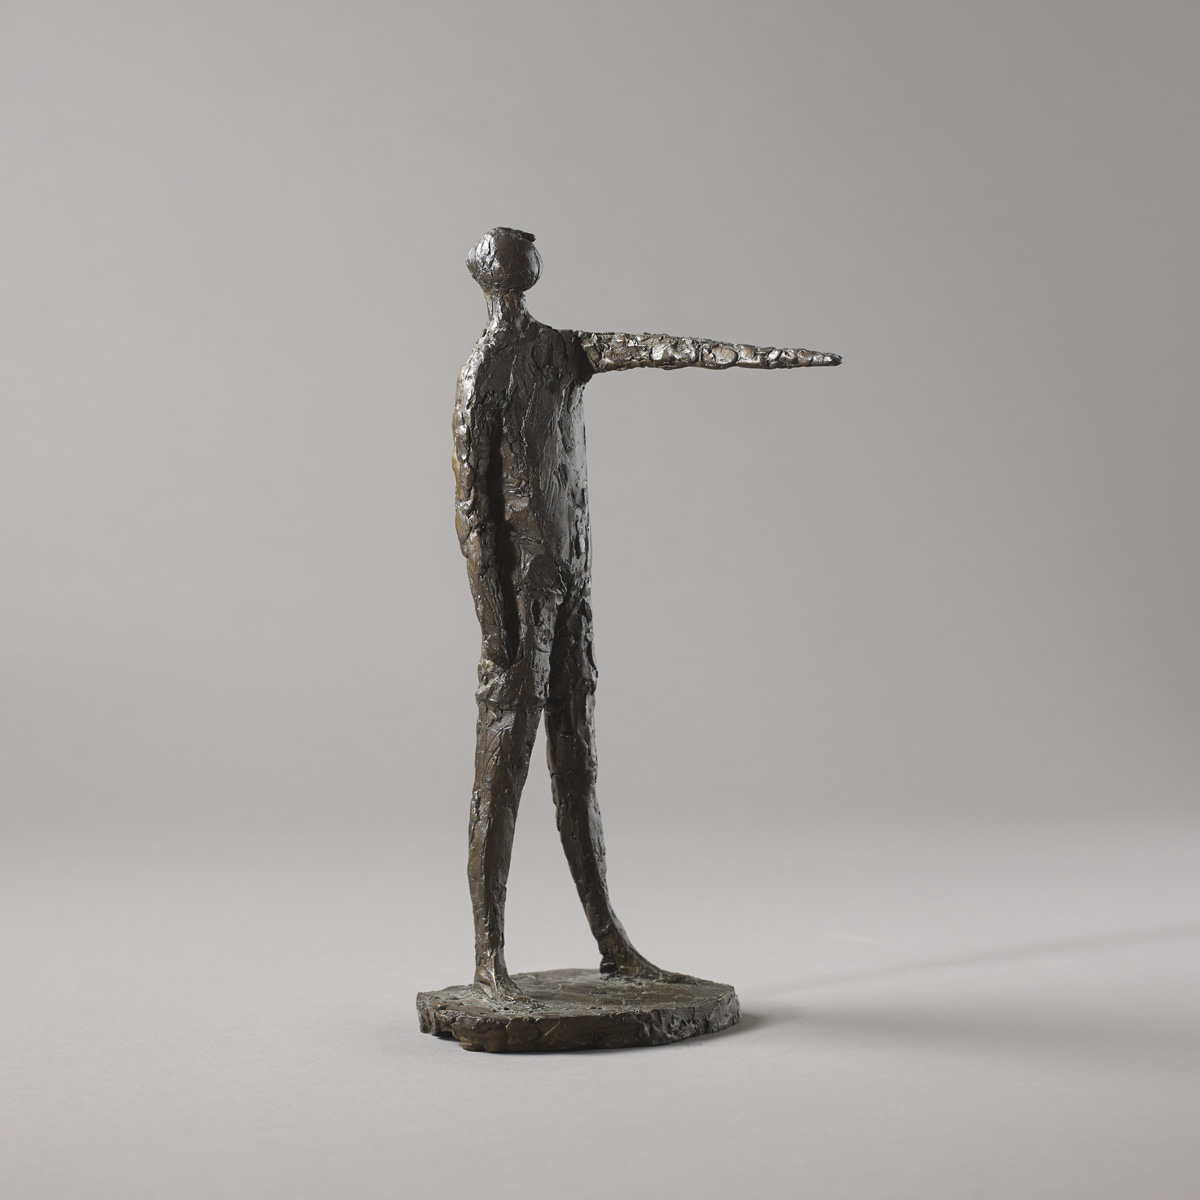 BOY STANDING by Melanie le Brocquy HRHA (1919-2018) at Whyte's Auctions